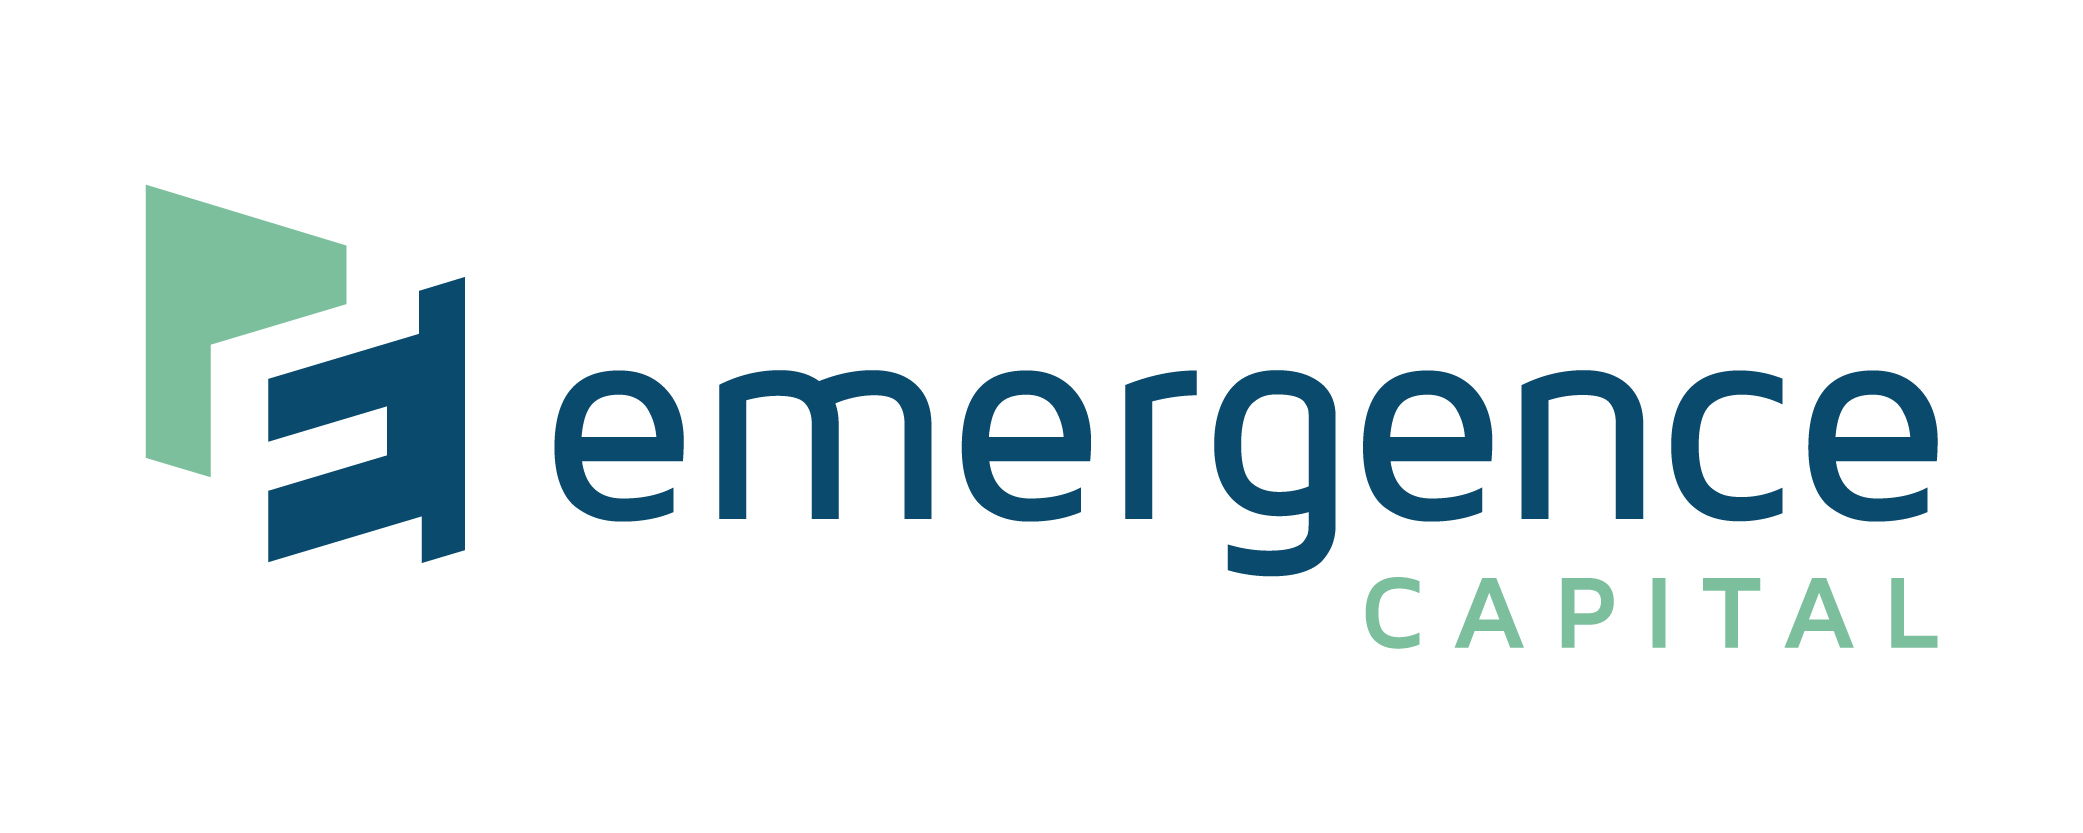 Emergence Capital Announces New $435m Fund Dedicated to